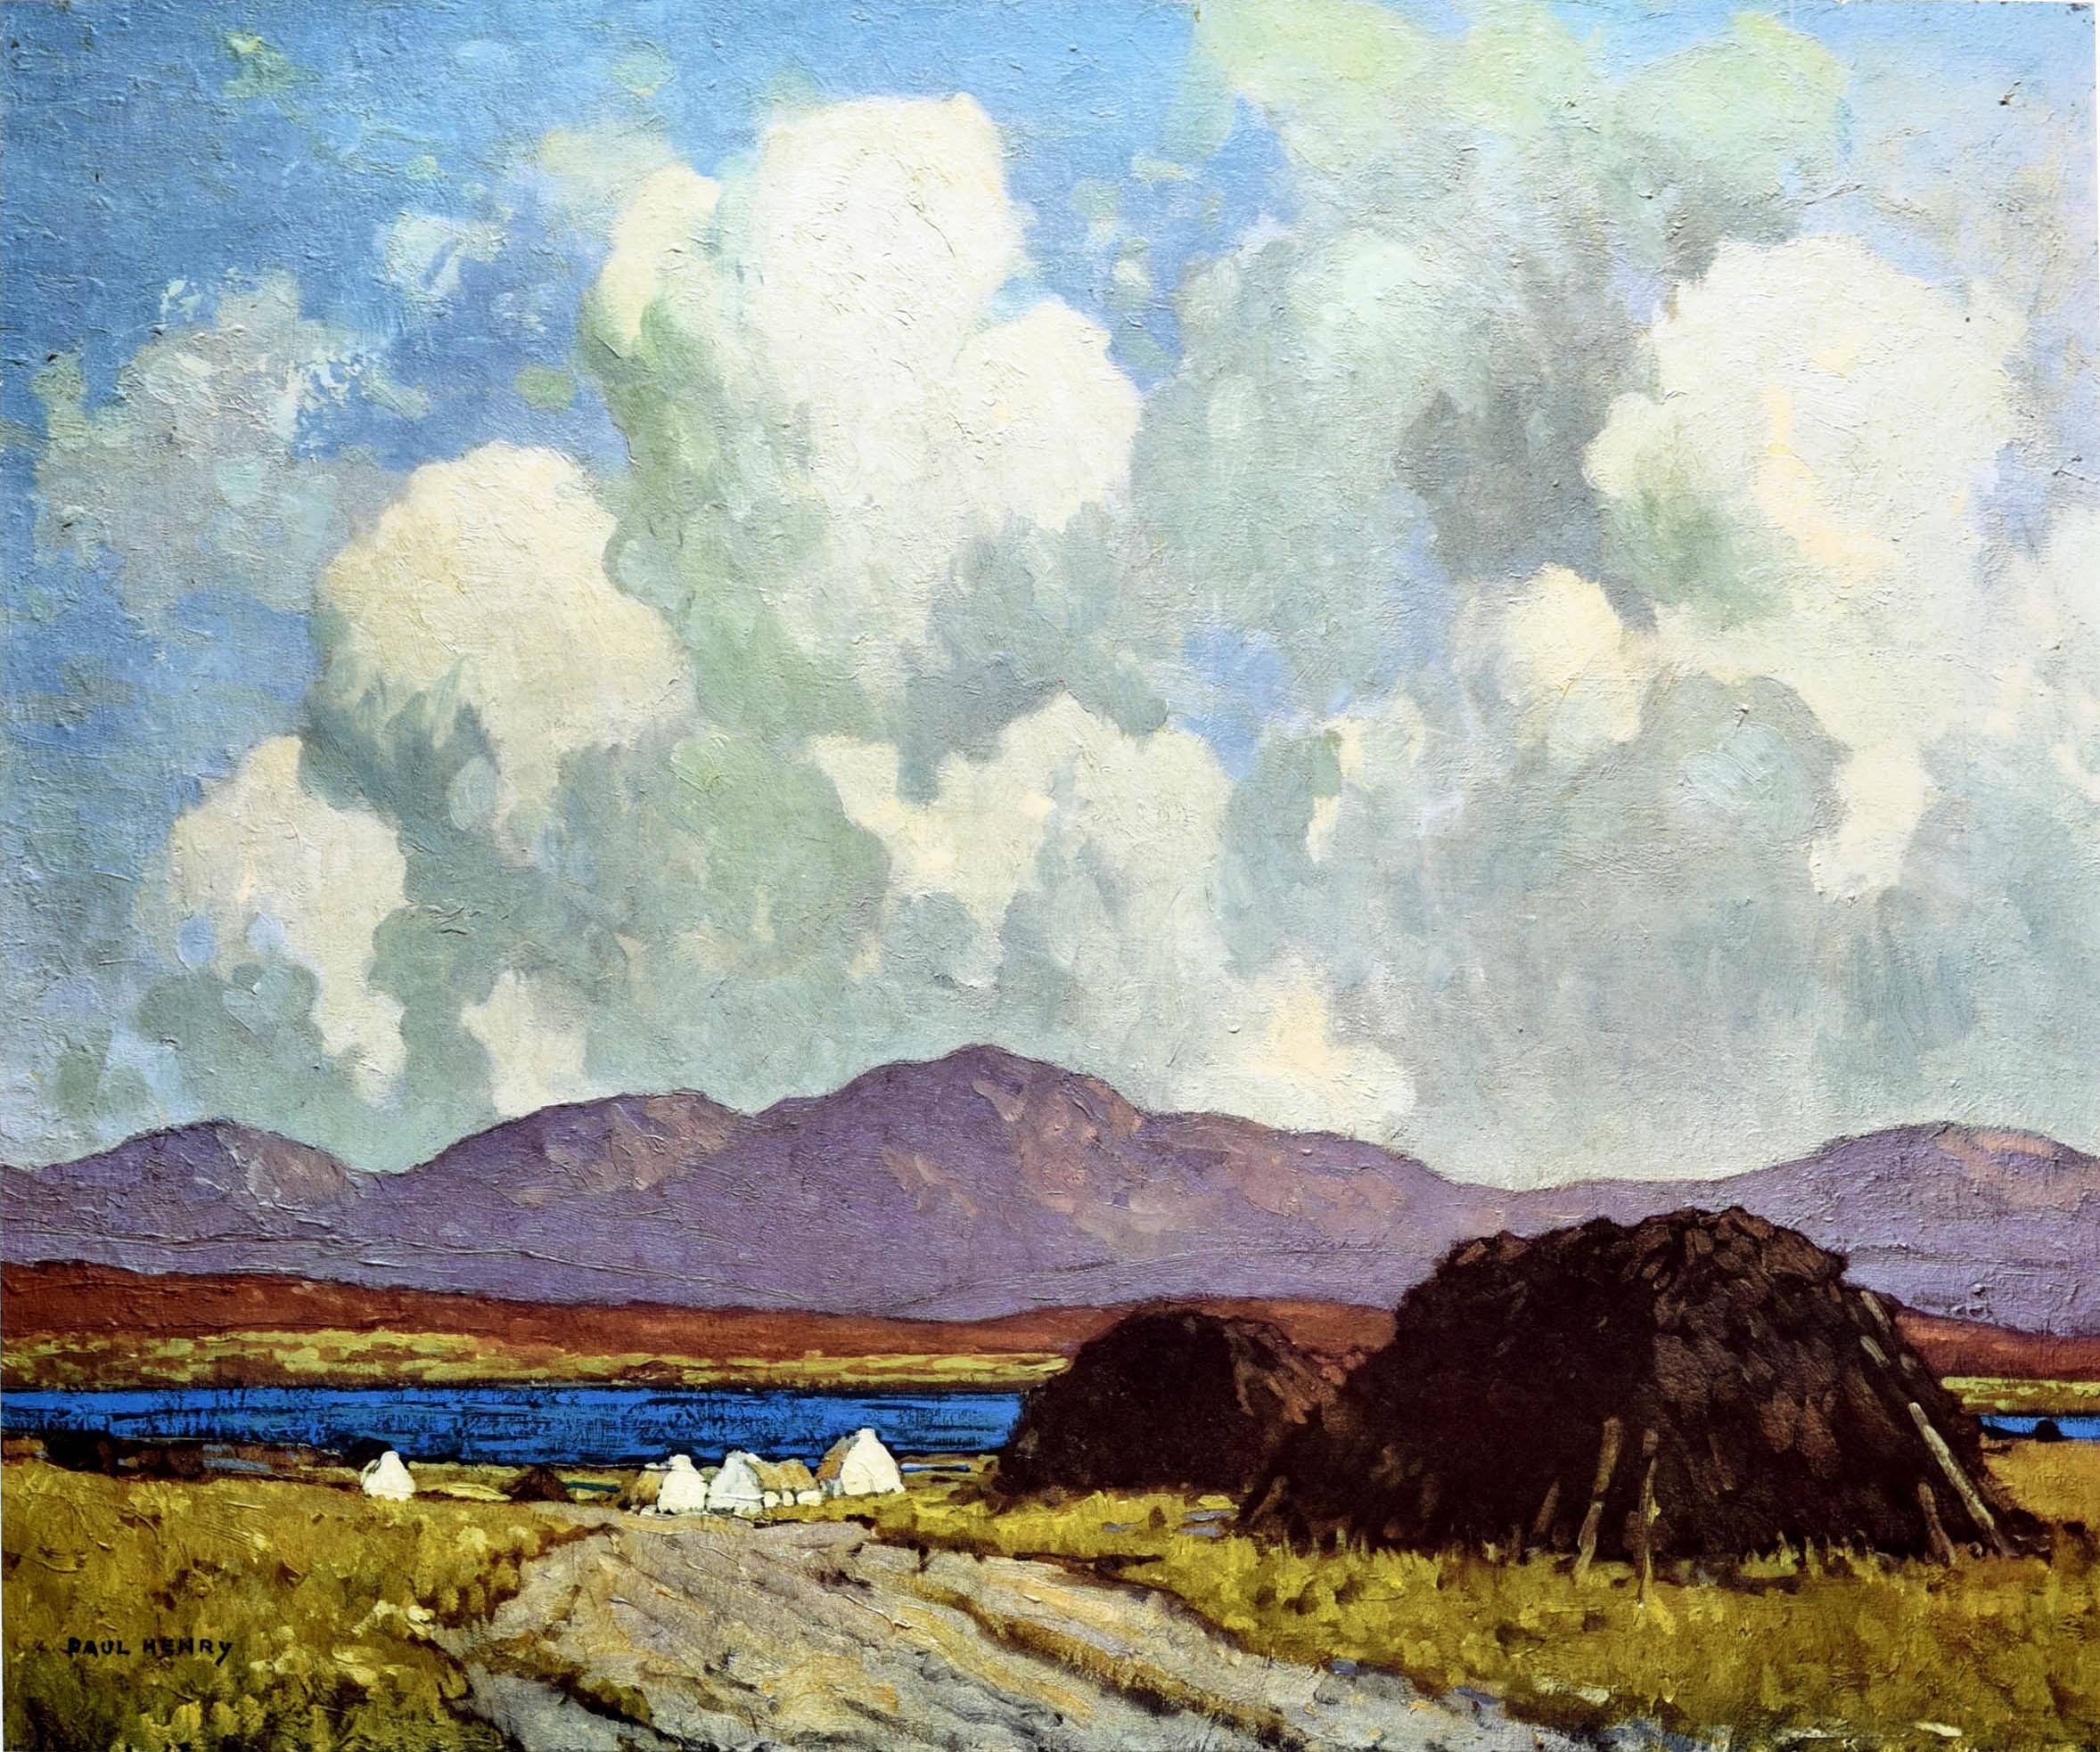 Original vintage travel poster for Ireland featuring scenic artwork depicting the countryside with the title and caption on the white border below - Connemara Landscape from the original painting by Paul Henry. Connemara is a rural region located in